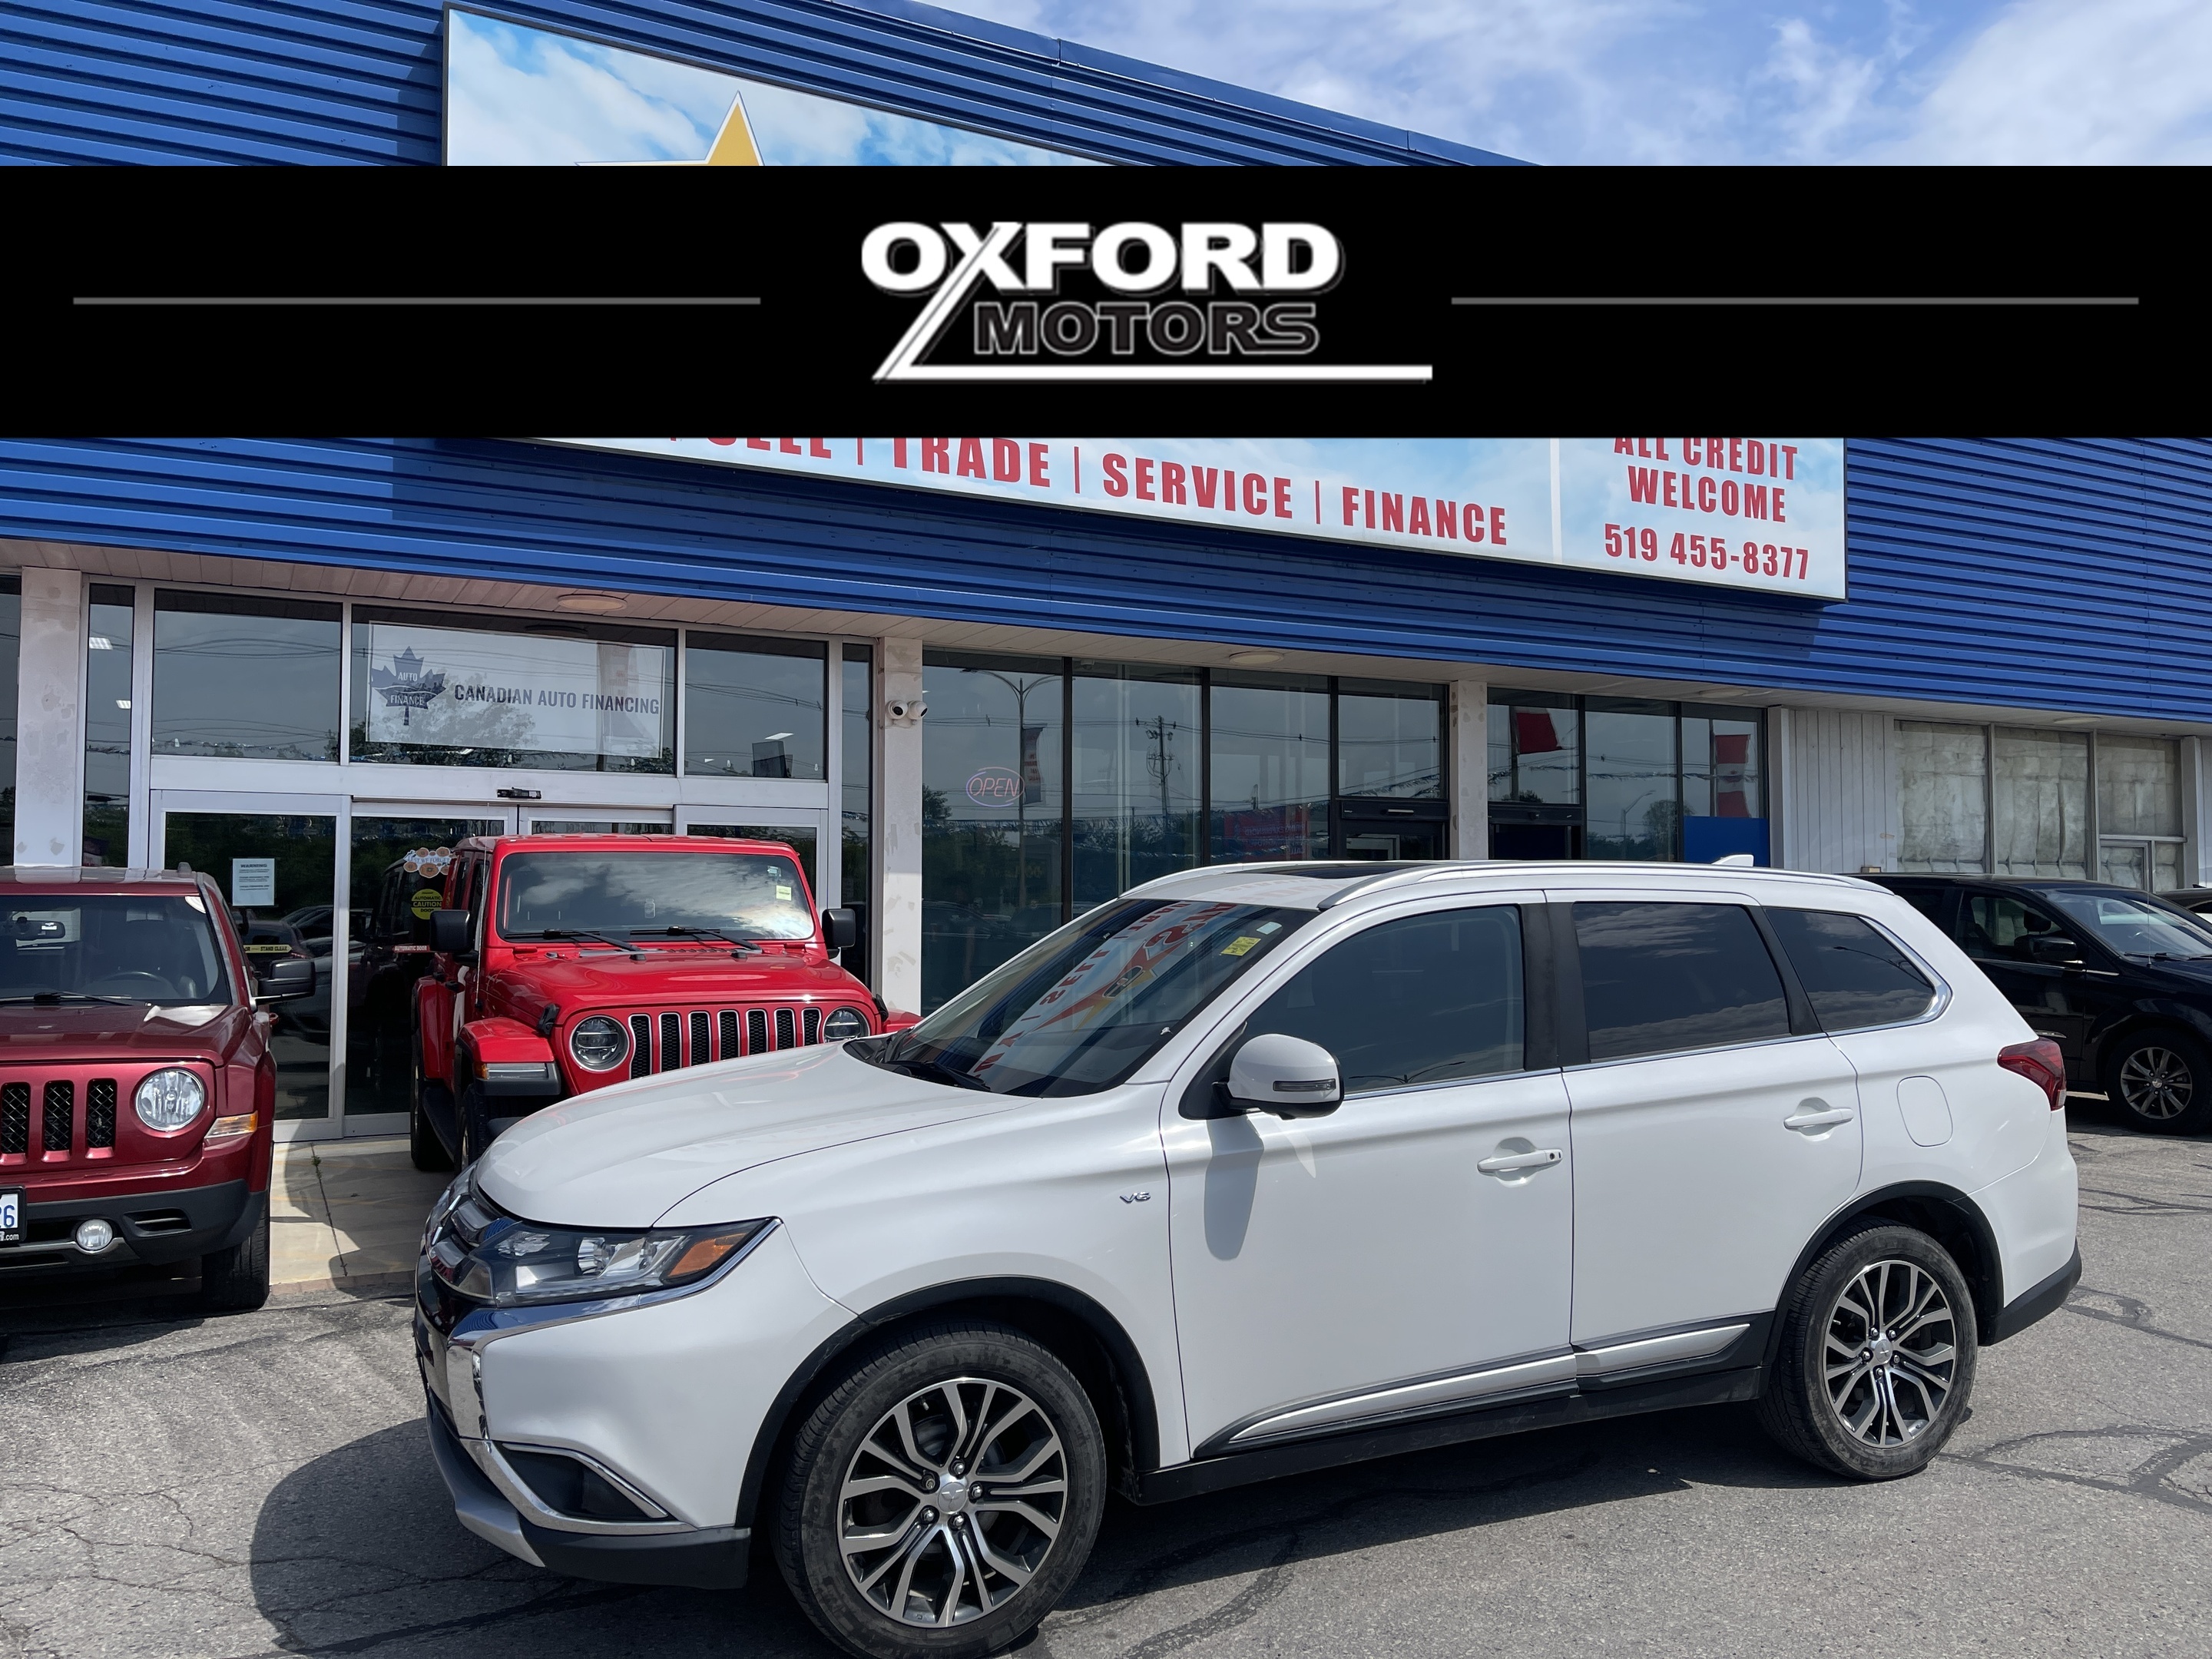 2017 Mitsubishi Outlander GT LEATHER SUNROOF LOADED! WE FINANCE ALL CREDIT!